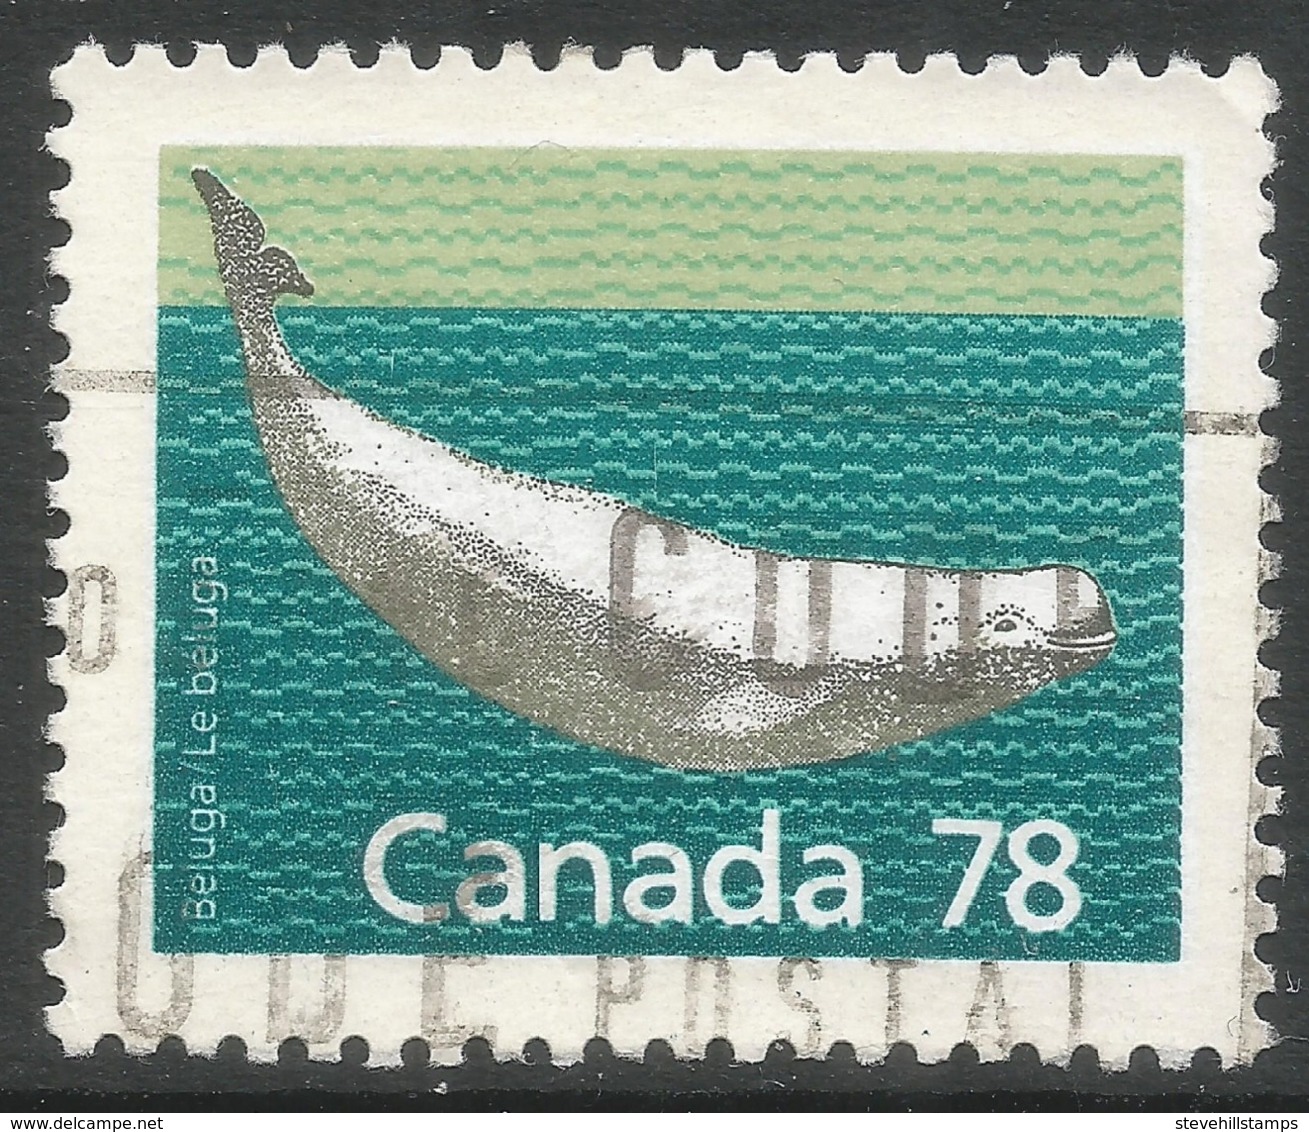 Canada. 1988 Canadian Mammals And Architecture. 78c Used. SG 1276 - Gebraucht